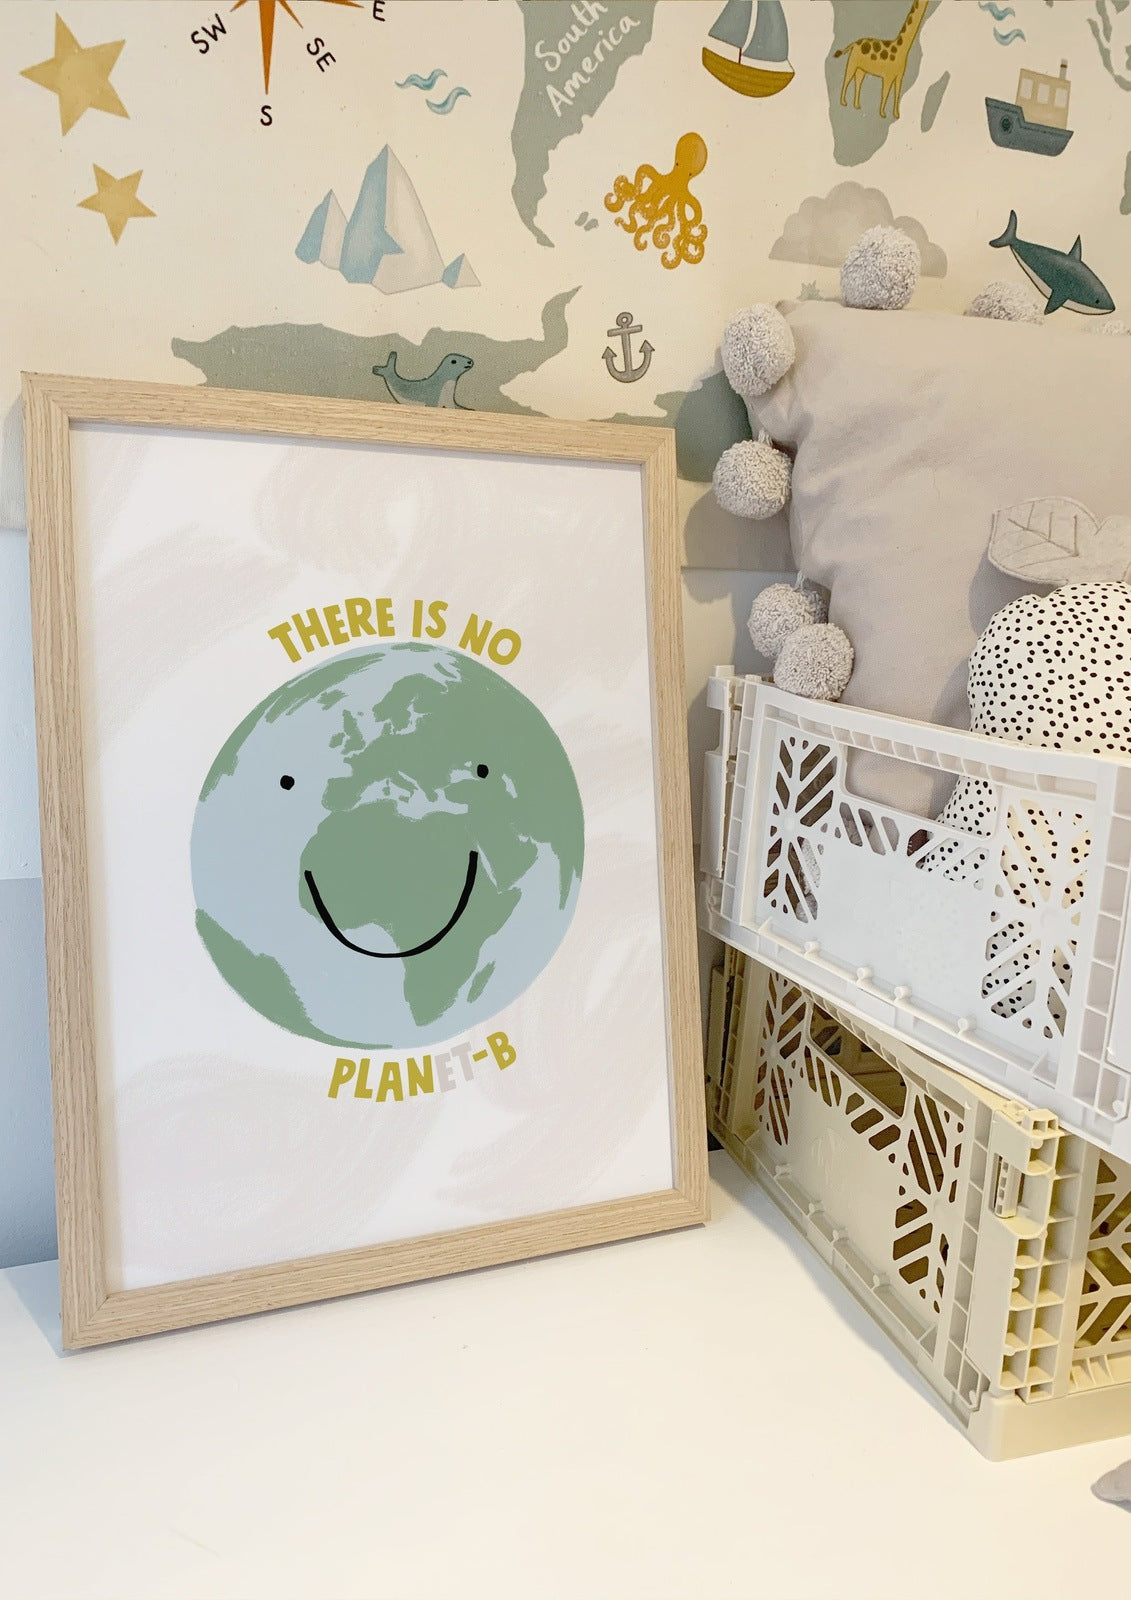 Minii & Maxii, One World A3 Print, There Is No Planet-B, Nottingham Kids Shop, Midlands Baby Shop, World Print, Nursery Decor, Nottingham Kids Shop, Midlands Baby Shop